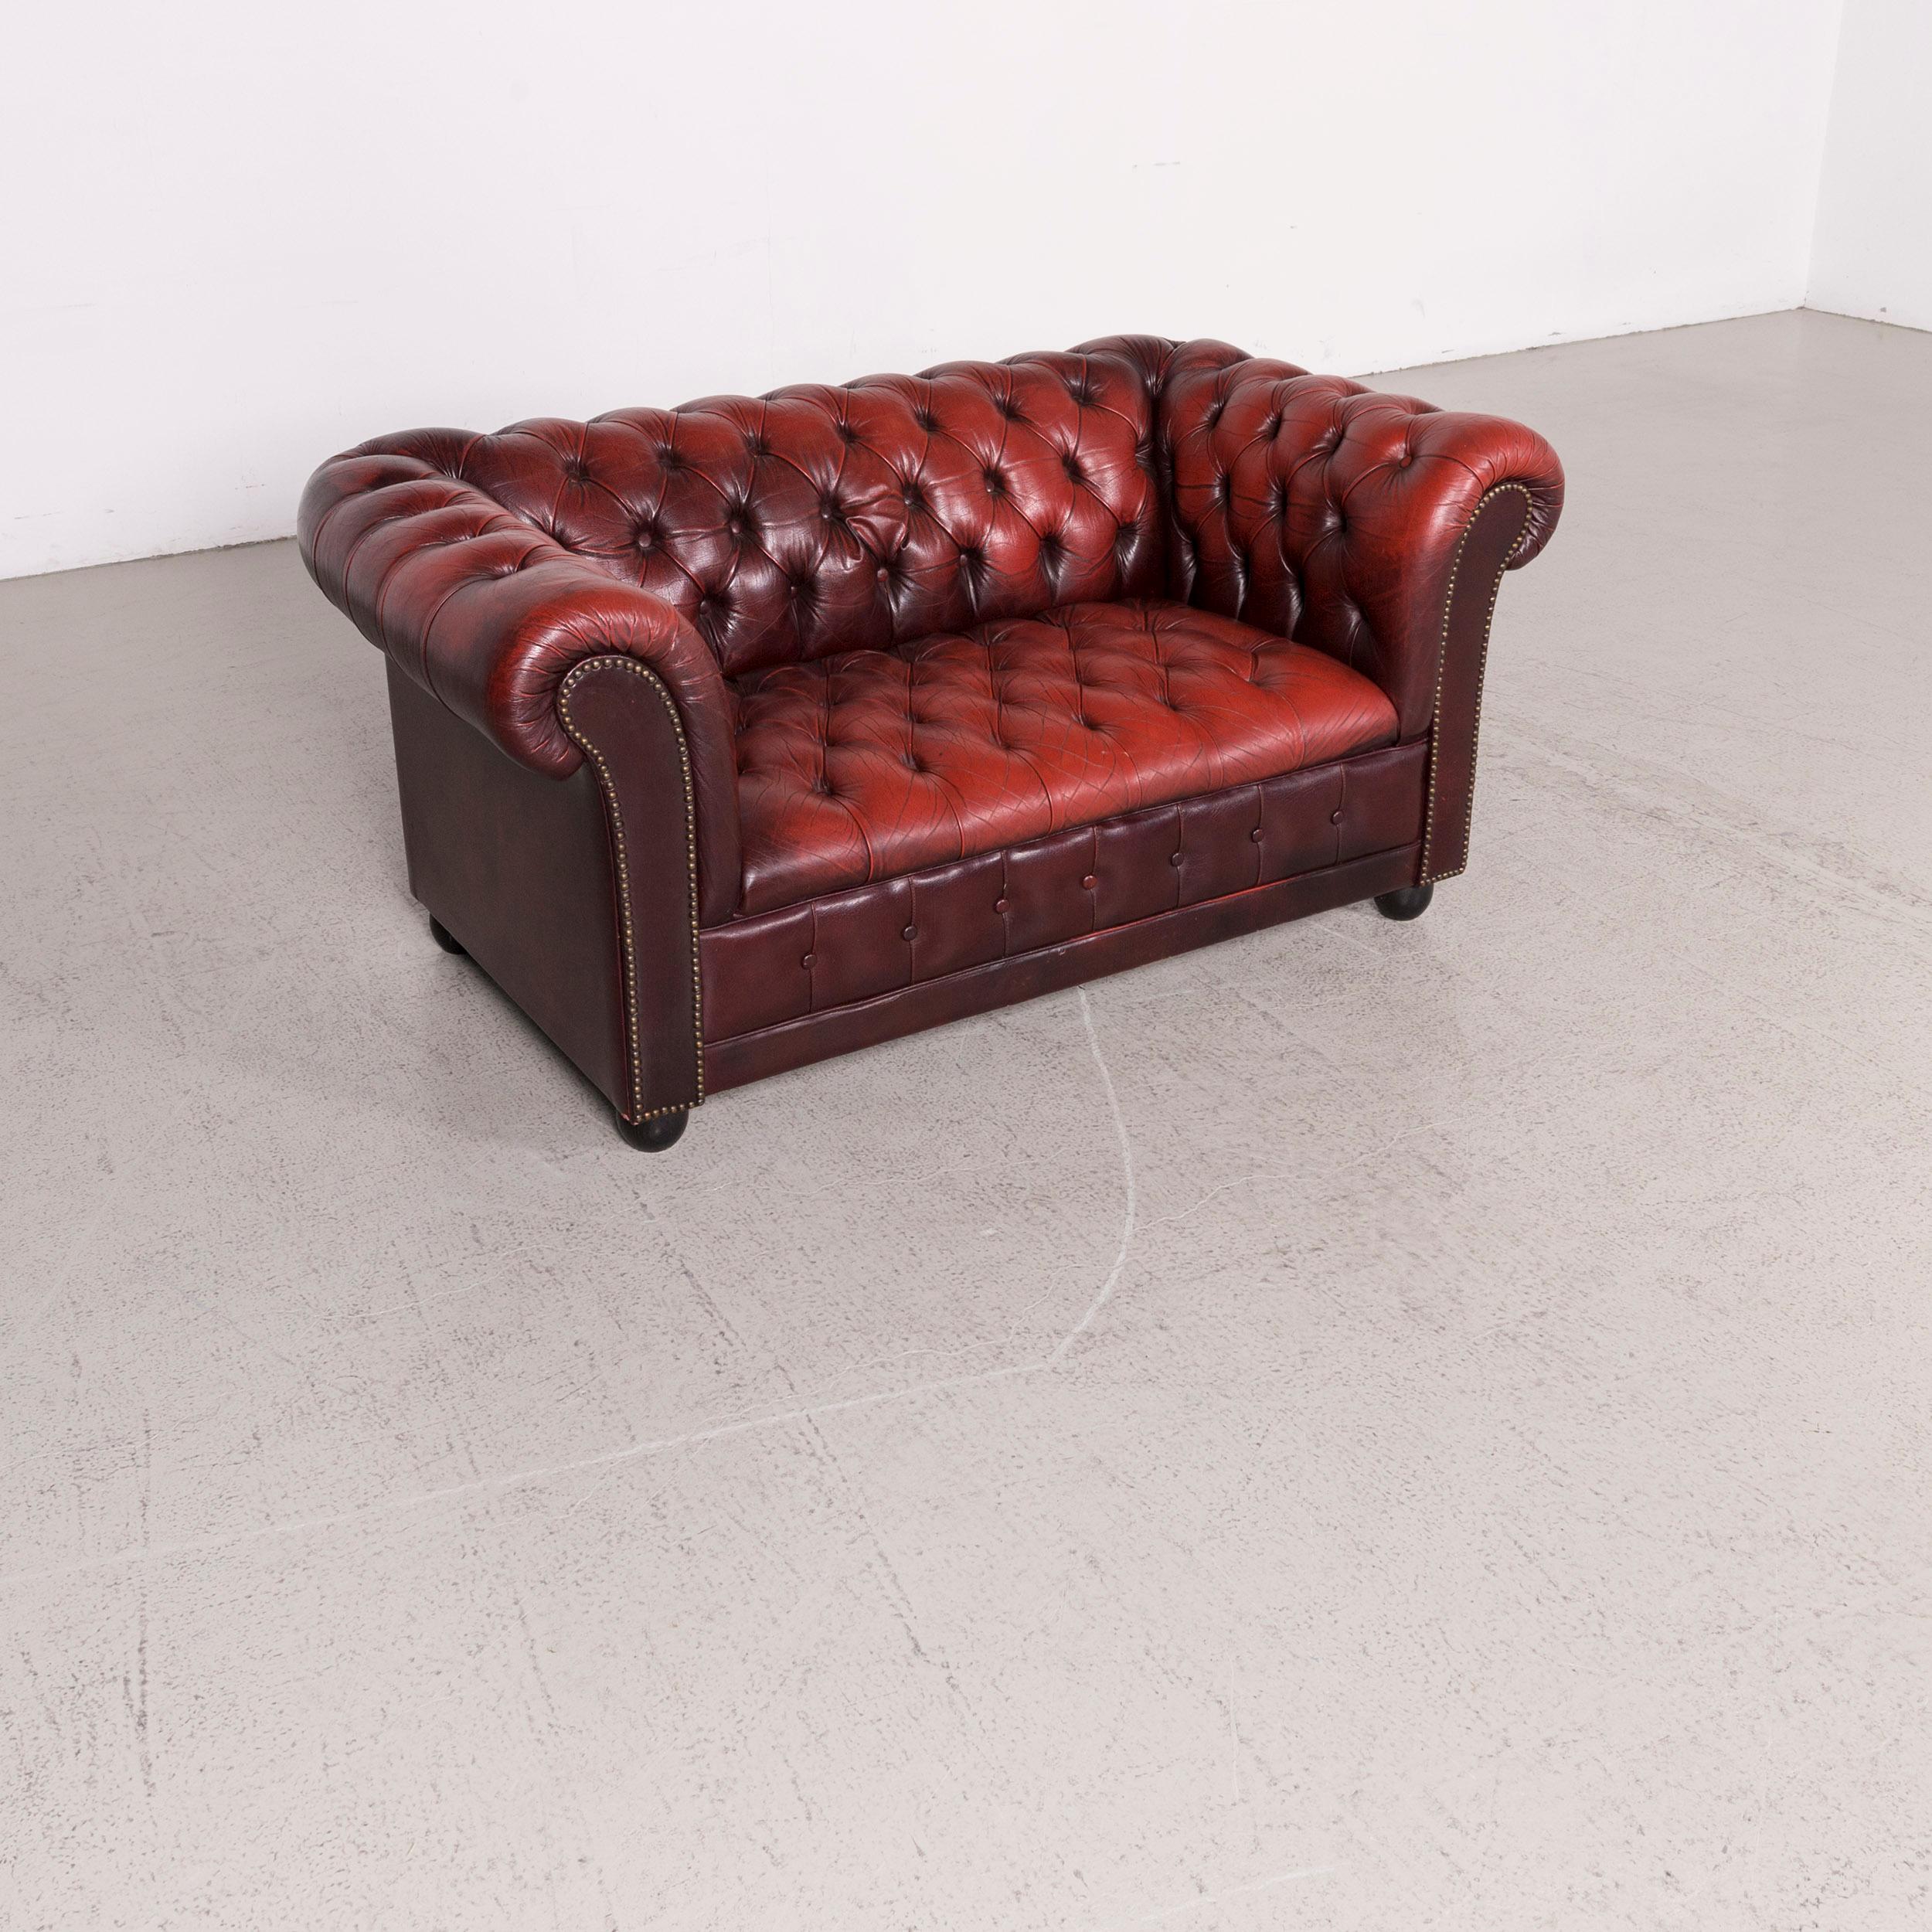 We bring to you a Chesterfield designer leather sofa red two-seat genuine leather vintage retro.

Product measurements in centimeters:

Depth 85
Width 150
Height 70
Seat-height 40
Rest-height 70
Seat-depth 45
Seat-width 90
Back-height